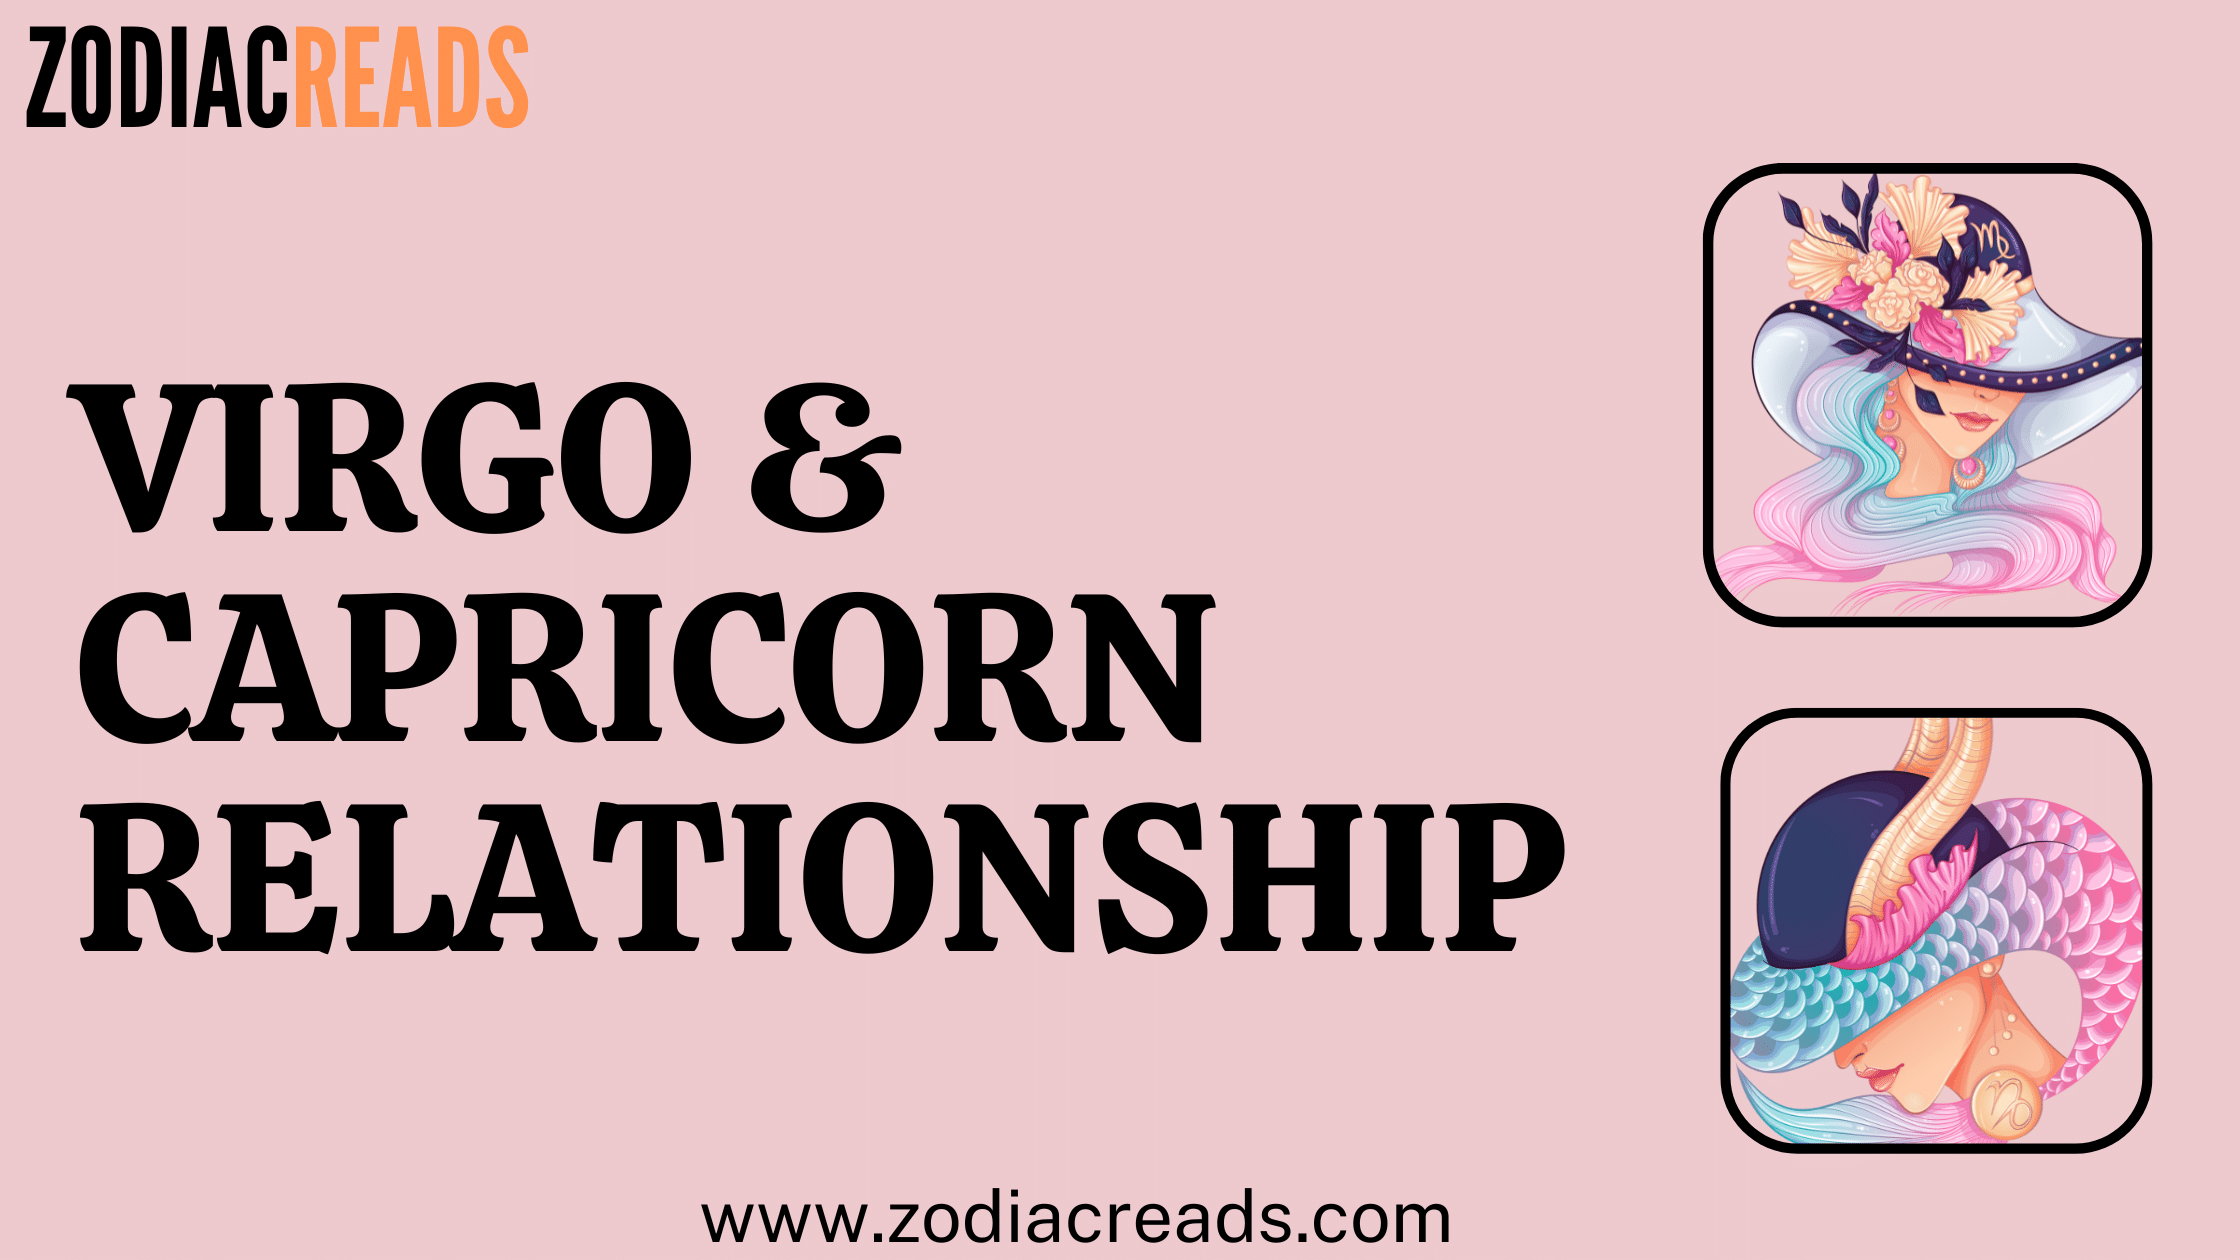 A harmonious connection between Virgo and Capricorn, showcasing compatibility in their relationship.